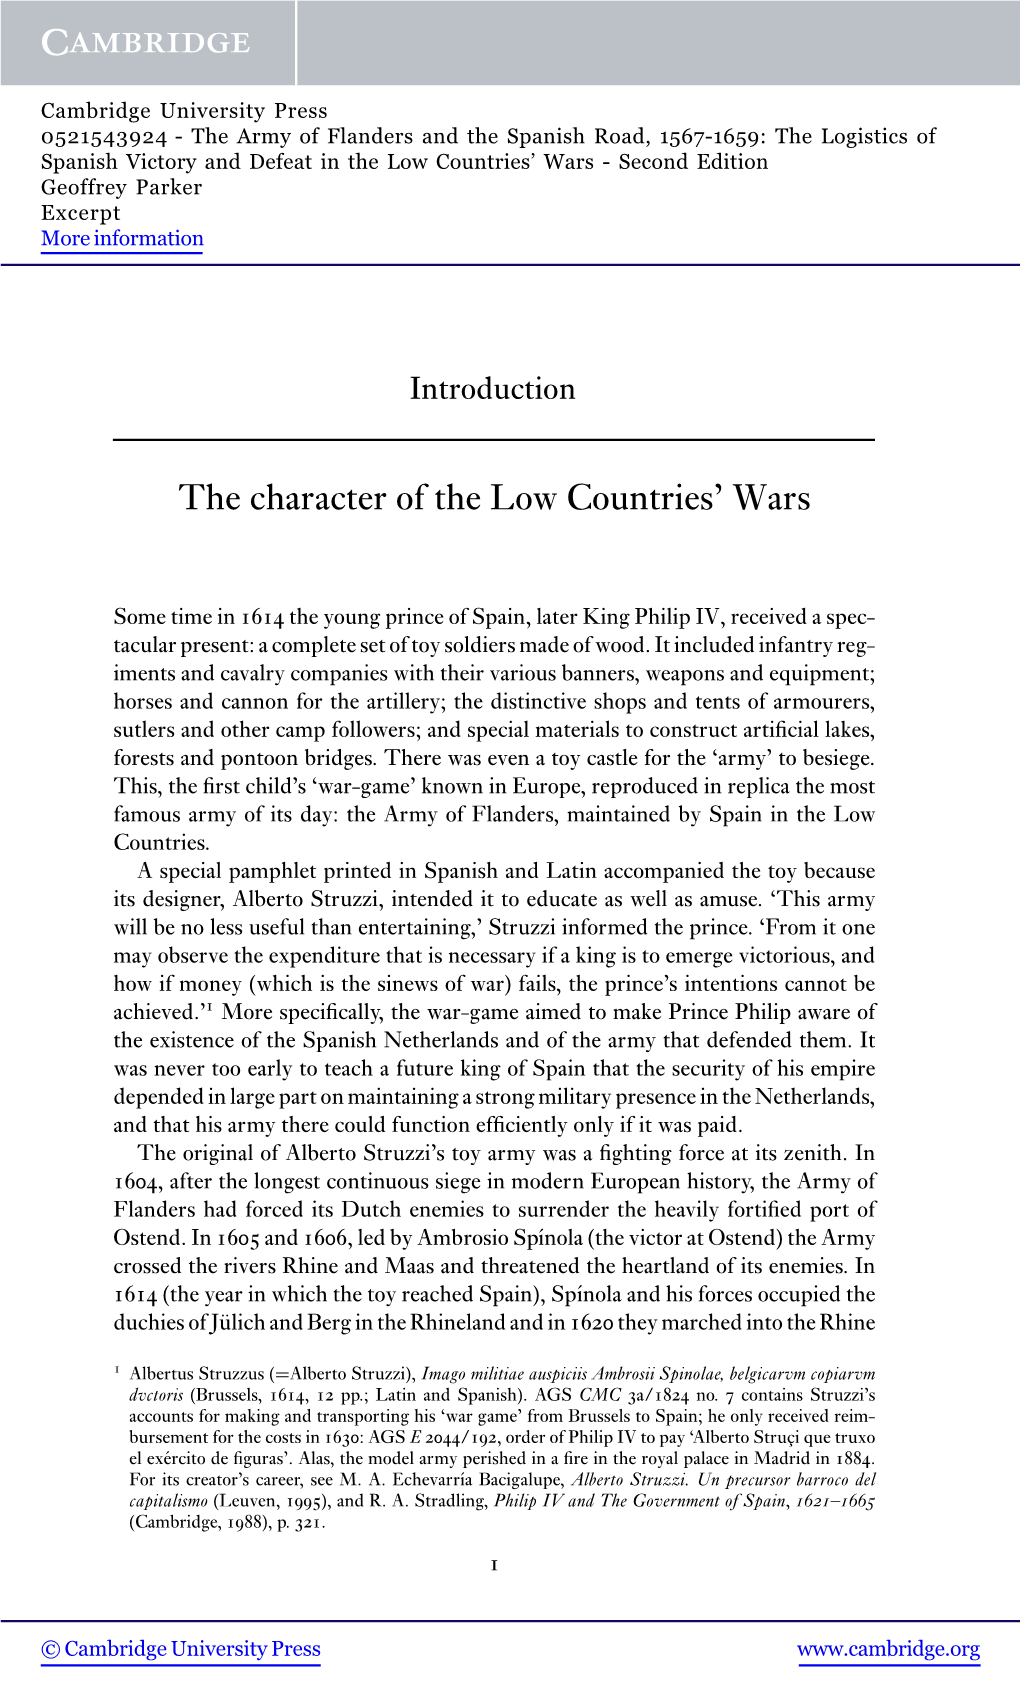 The Character of the Low Countries' Wars